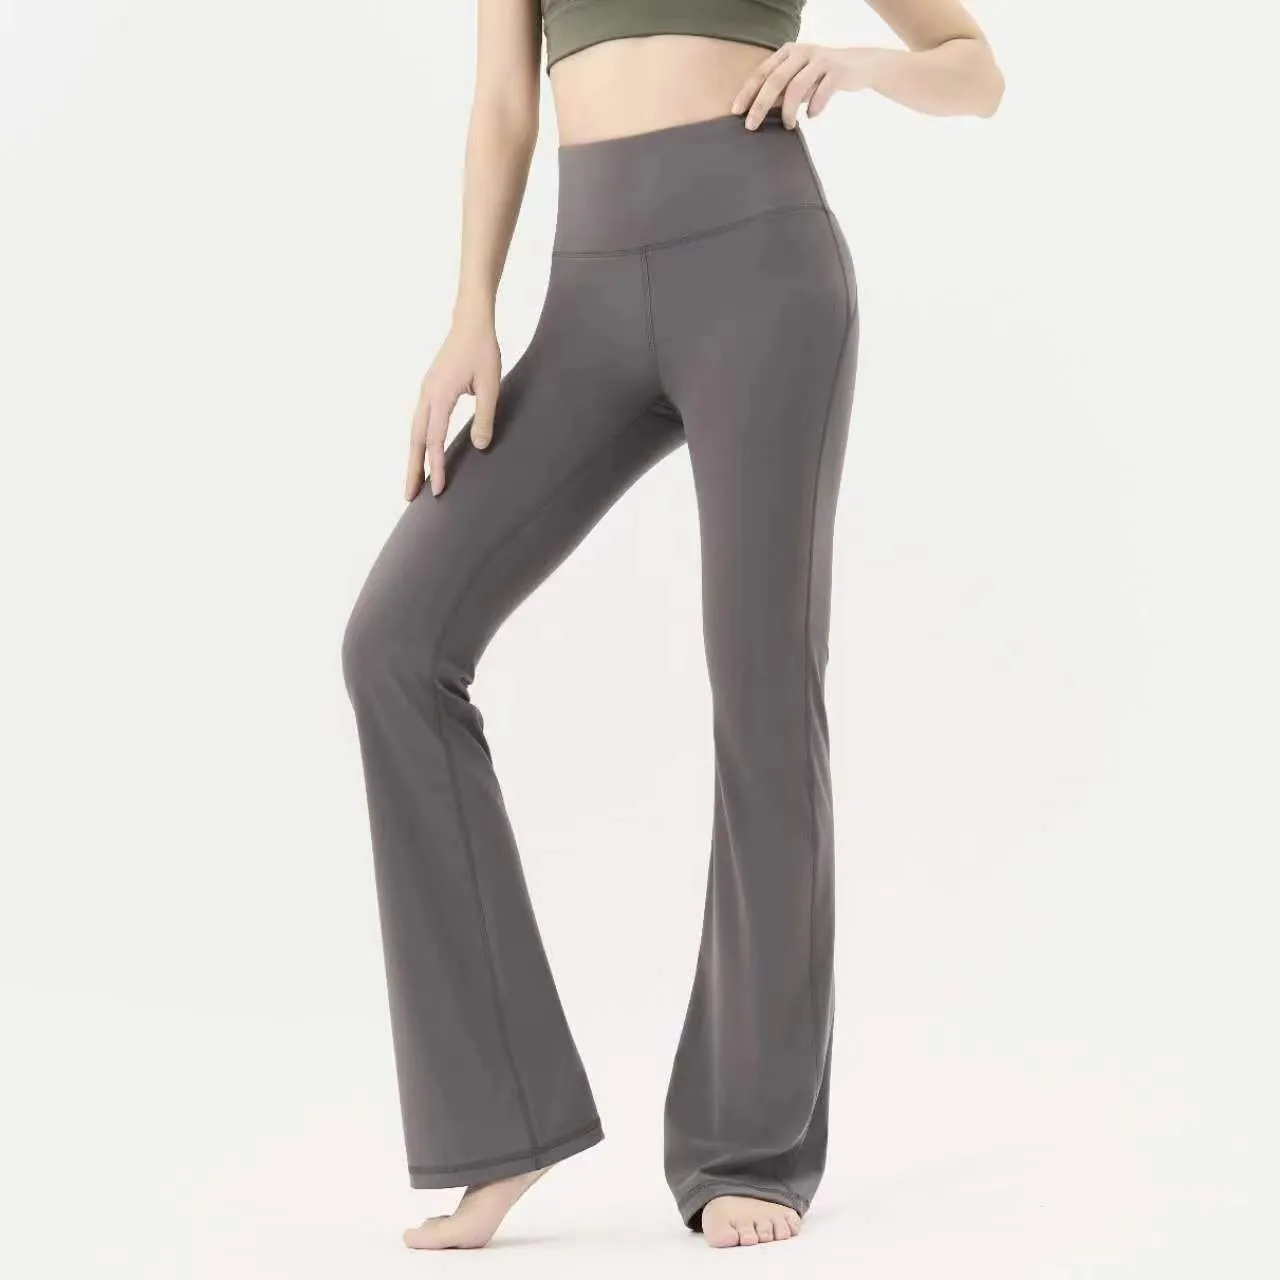 Super High Rise Flared Lycra Aritzia Yoga Pants Flare Lightweight,  Stretchy, And Sweat Wicking For Gym, Running, Sports CK2204 From  Play_sports, $22.95